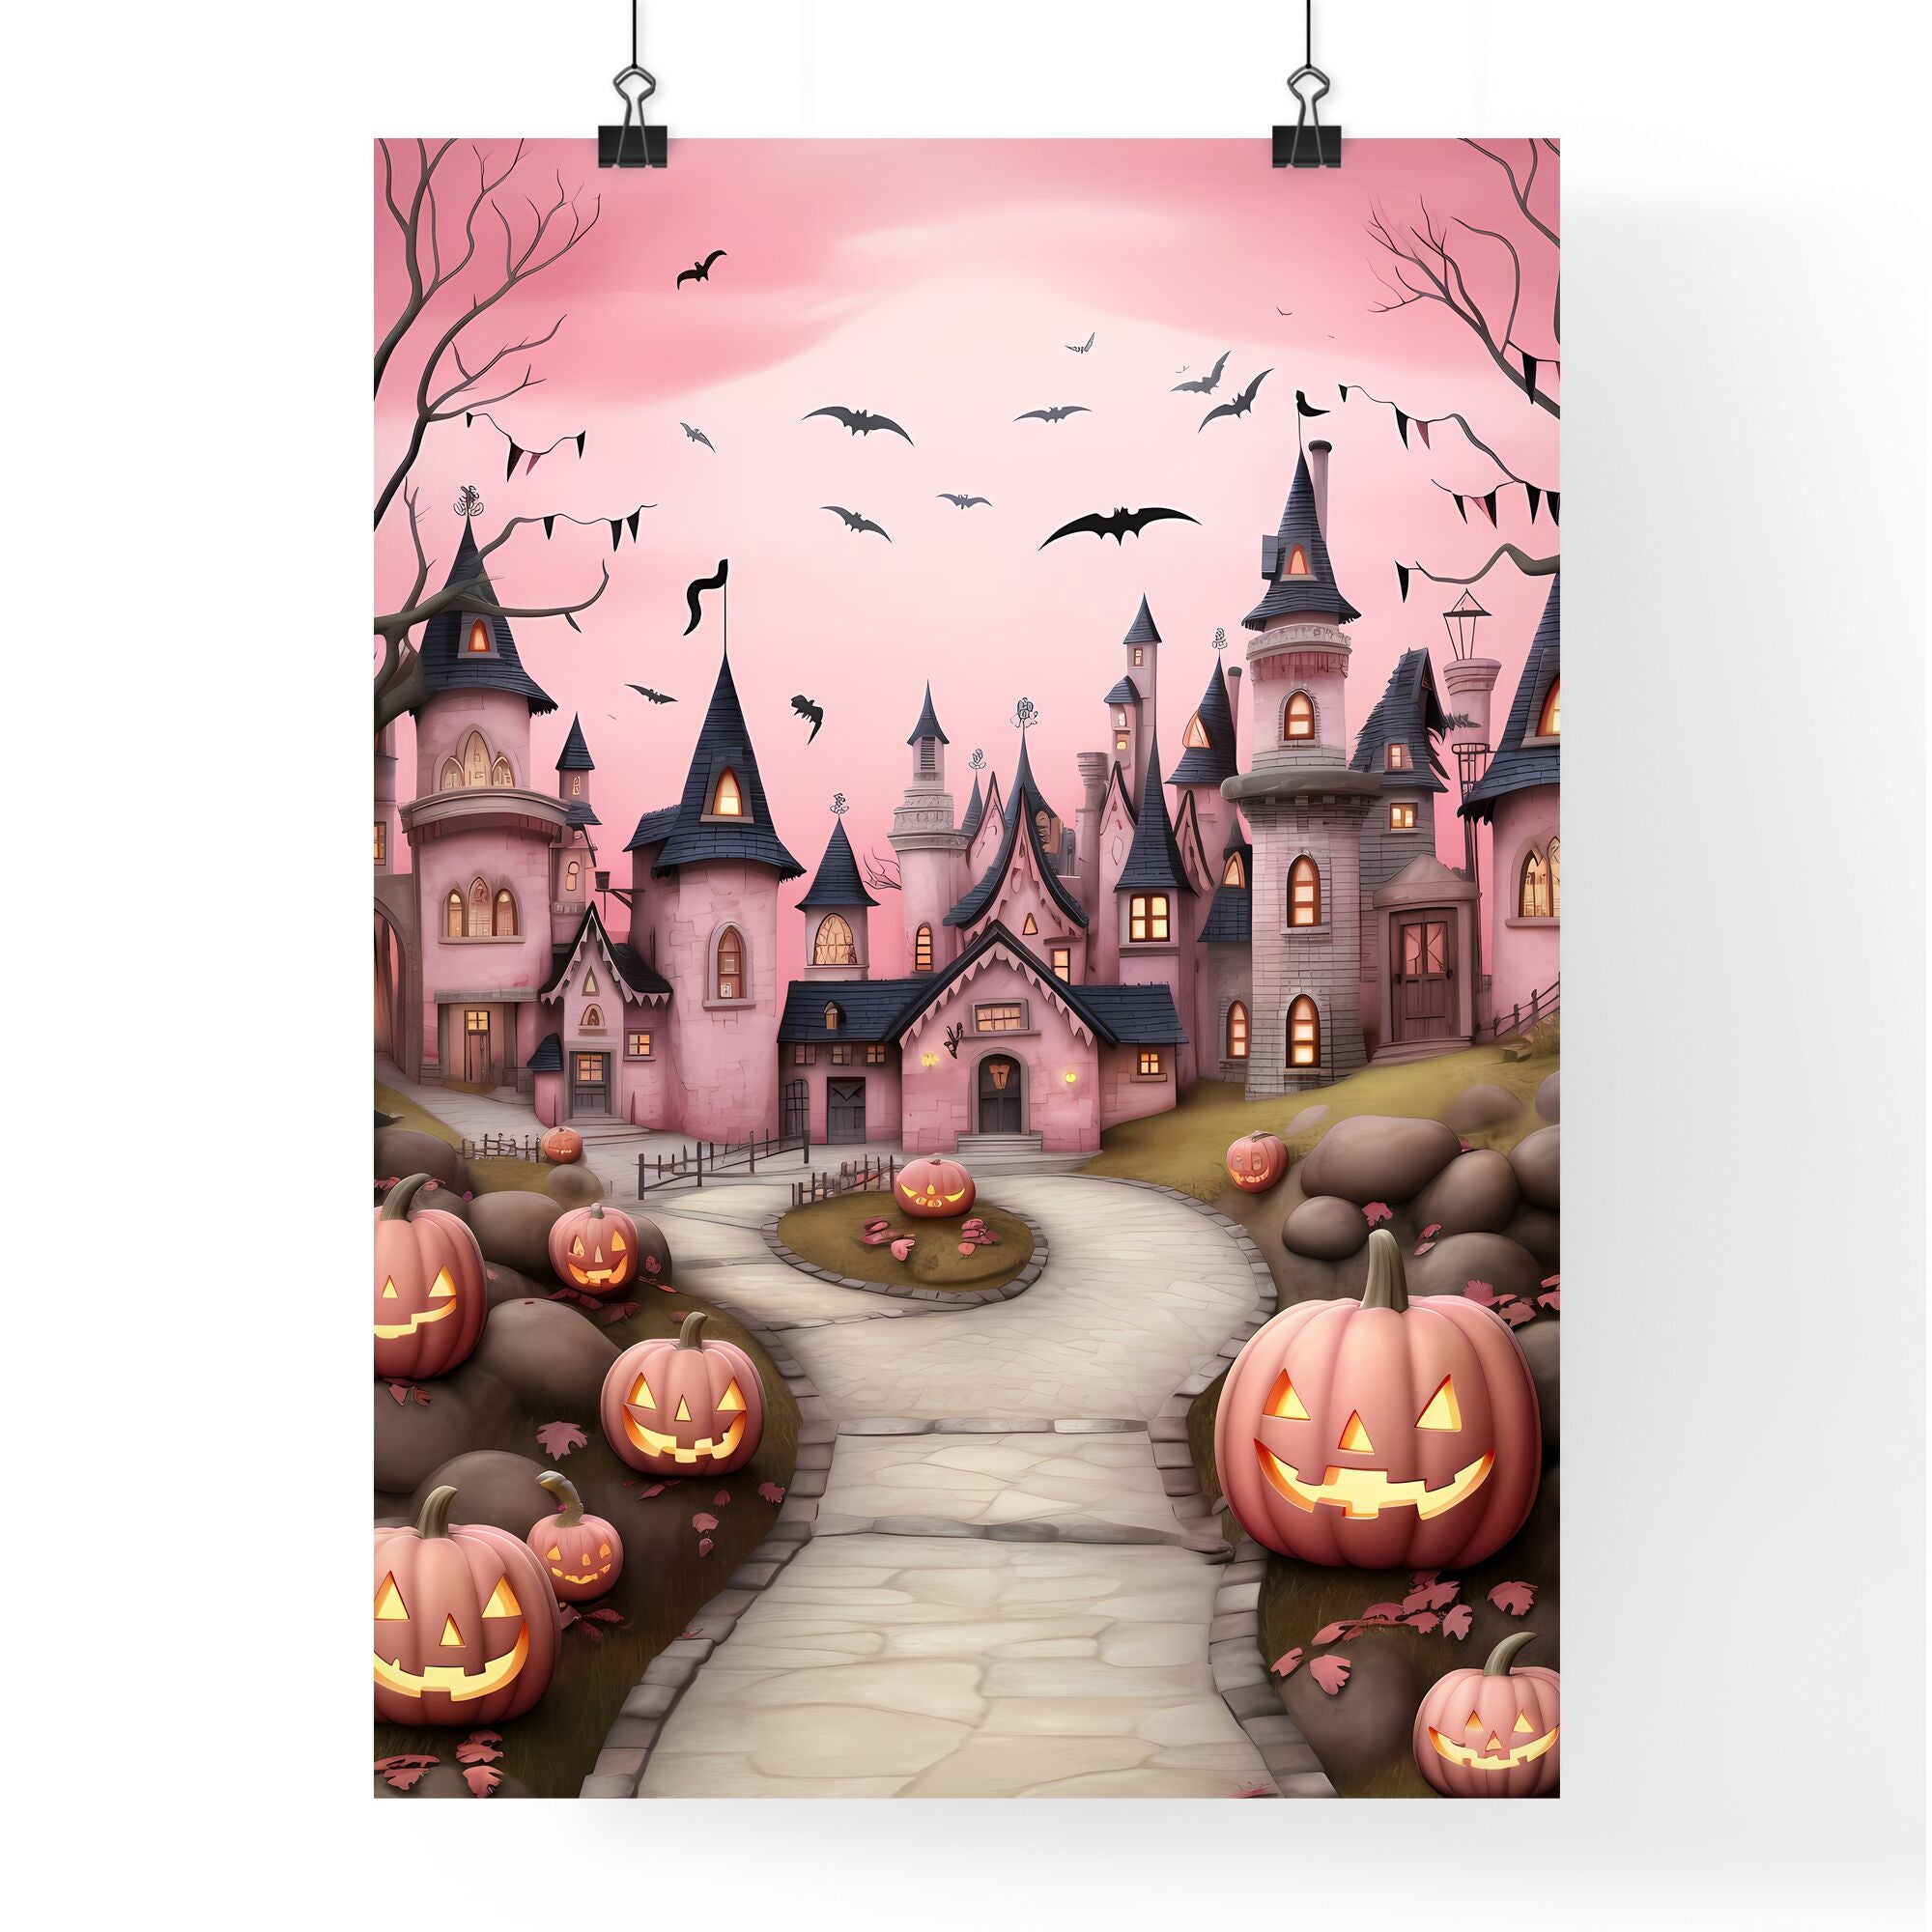 Pink Castle With Pumpkins And Bats Art Print by HEBSTREIT